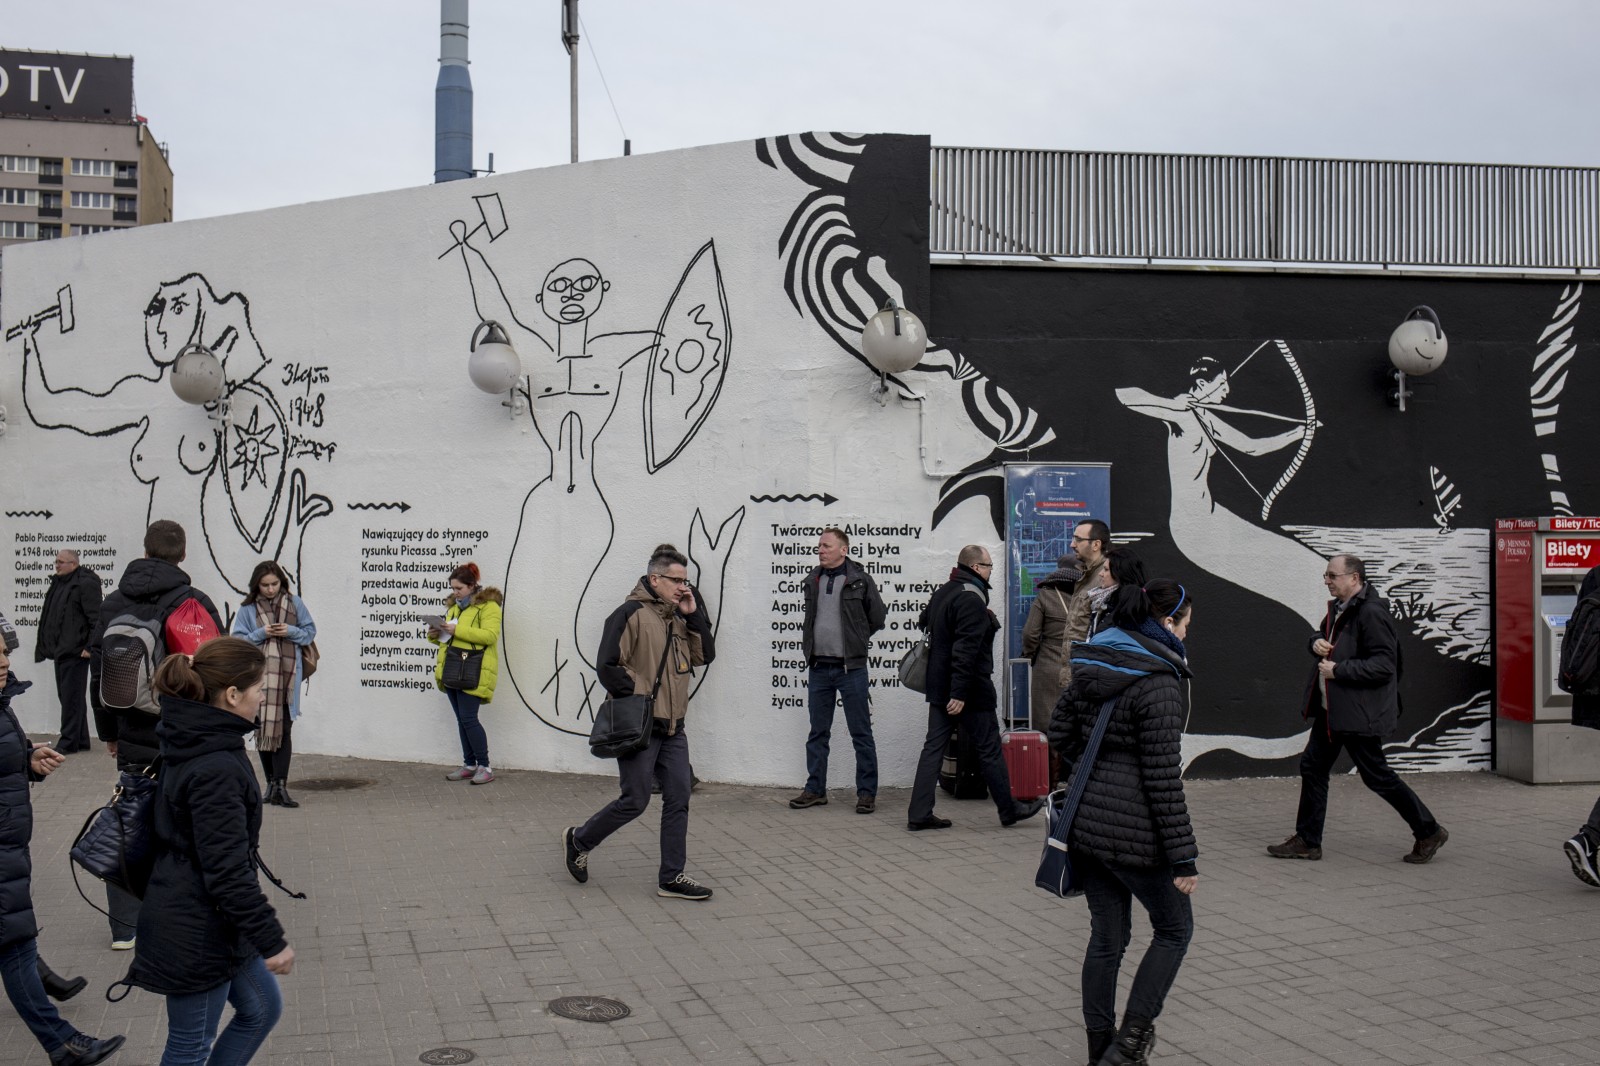 Artists painted sirens on the walls near the Centrum metro station | The beguiling siren is thy crest | Portfolio